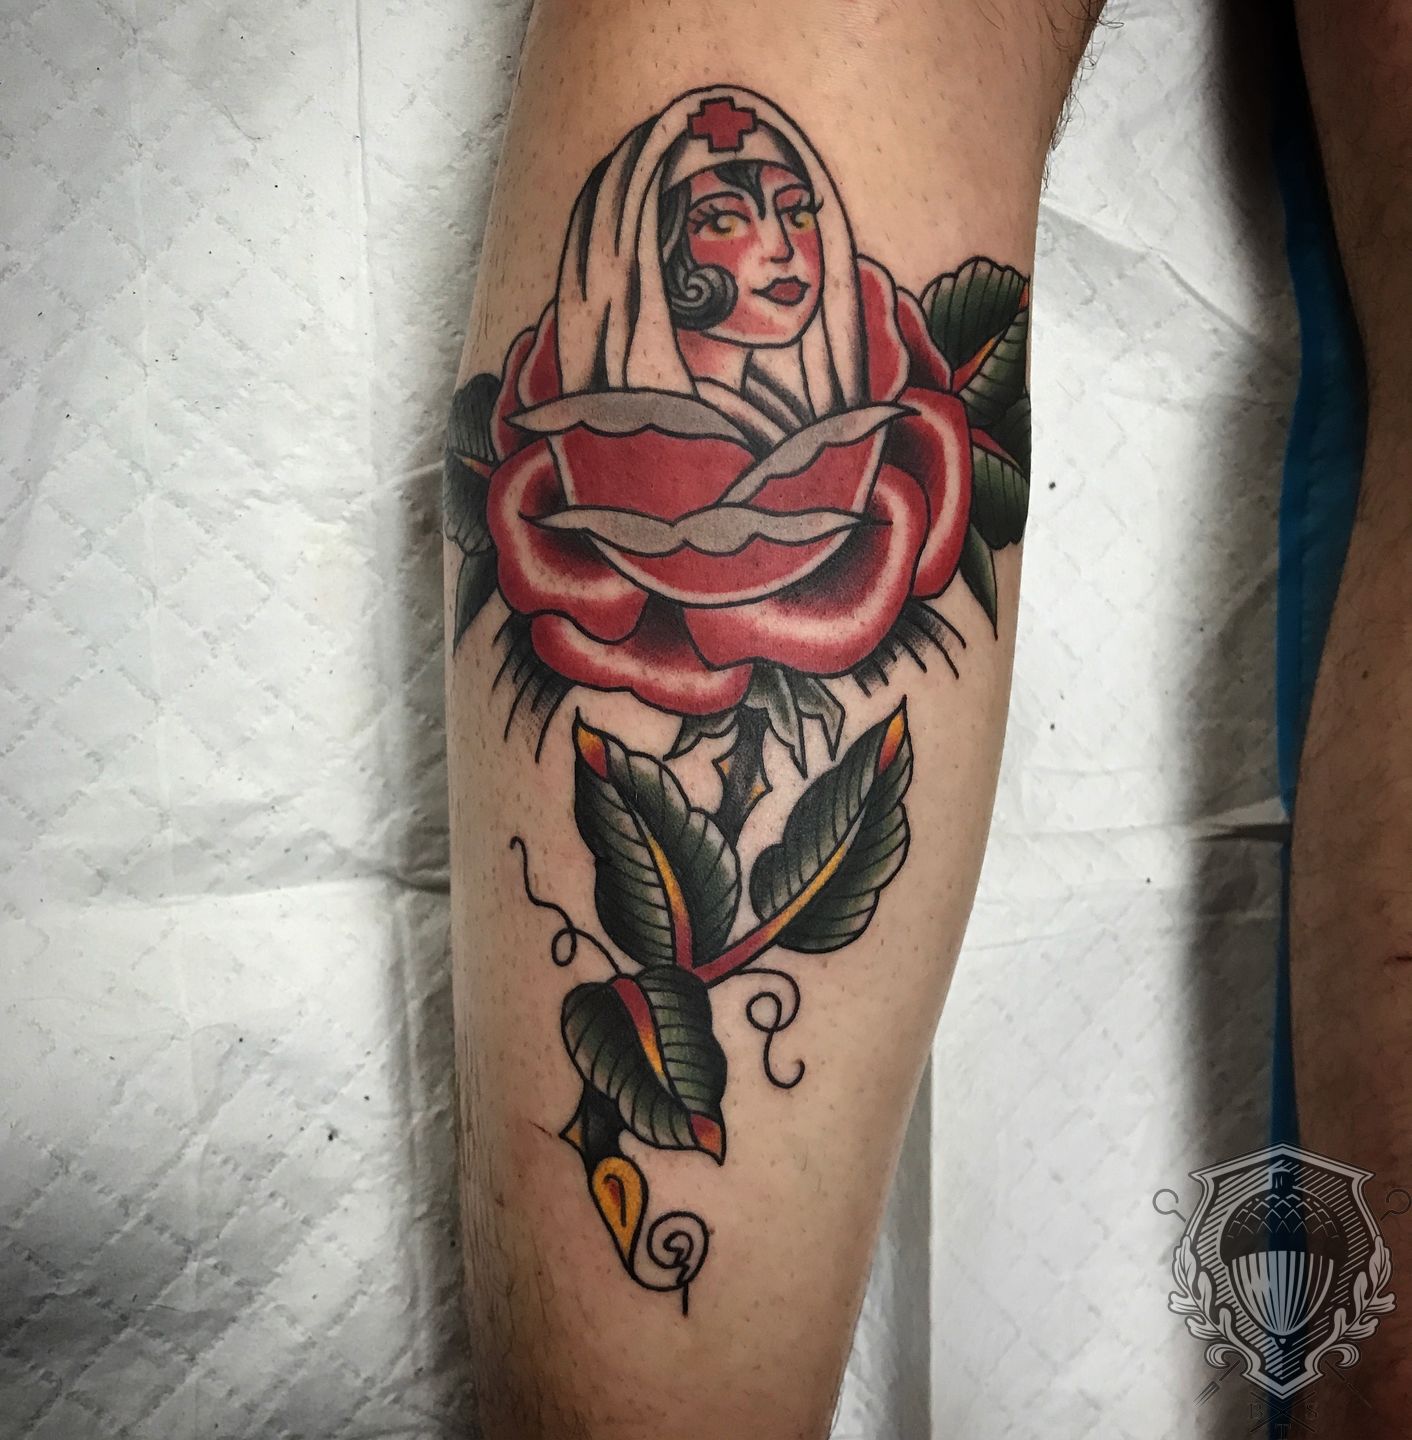 Sleepy Hollow Tattoos - Traditional Nurse tattoo done by @thejewthattattoos  give her a follow and shoot her a message for appointment info. #ftworth  #ftworthtattooartists #finkytownsbest #ftworthstockyards #tattoosformen  #tattoosforwomen #arlington ...